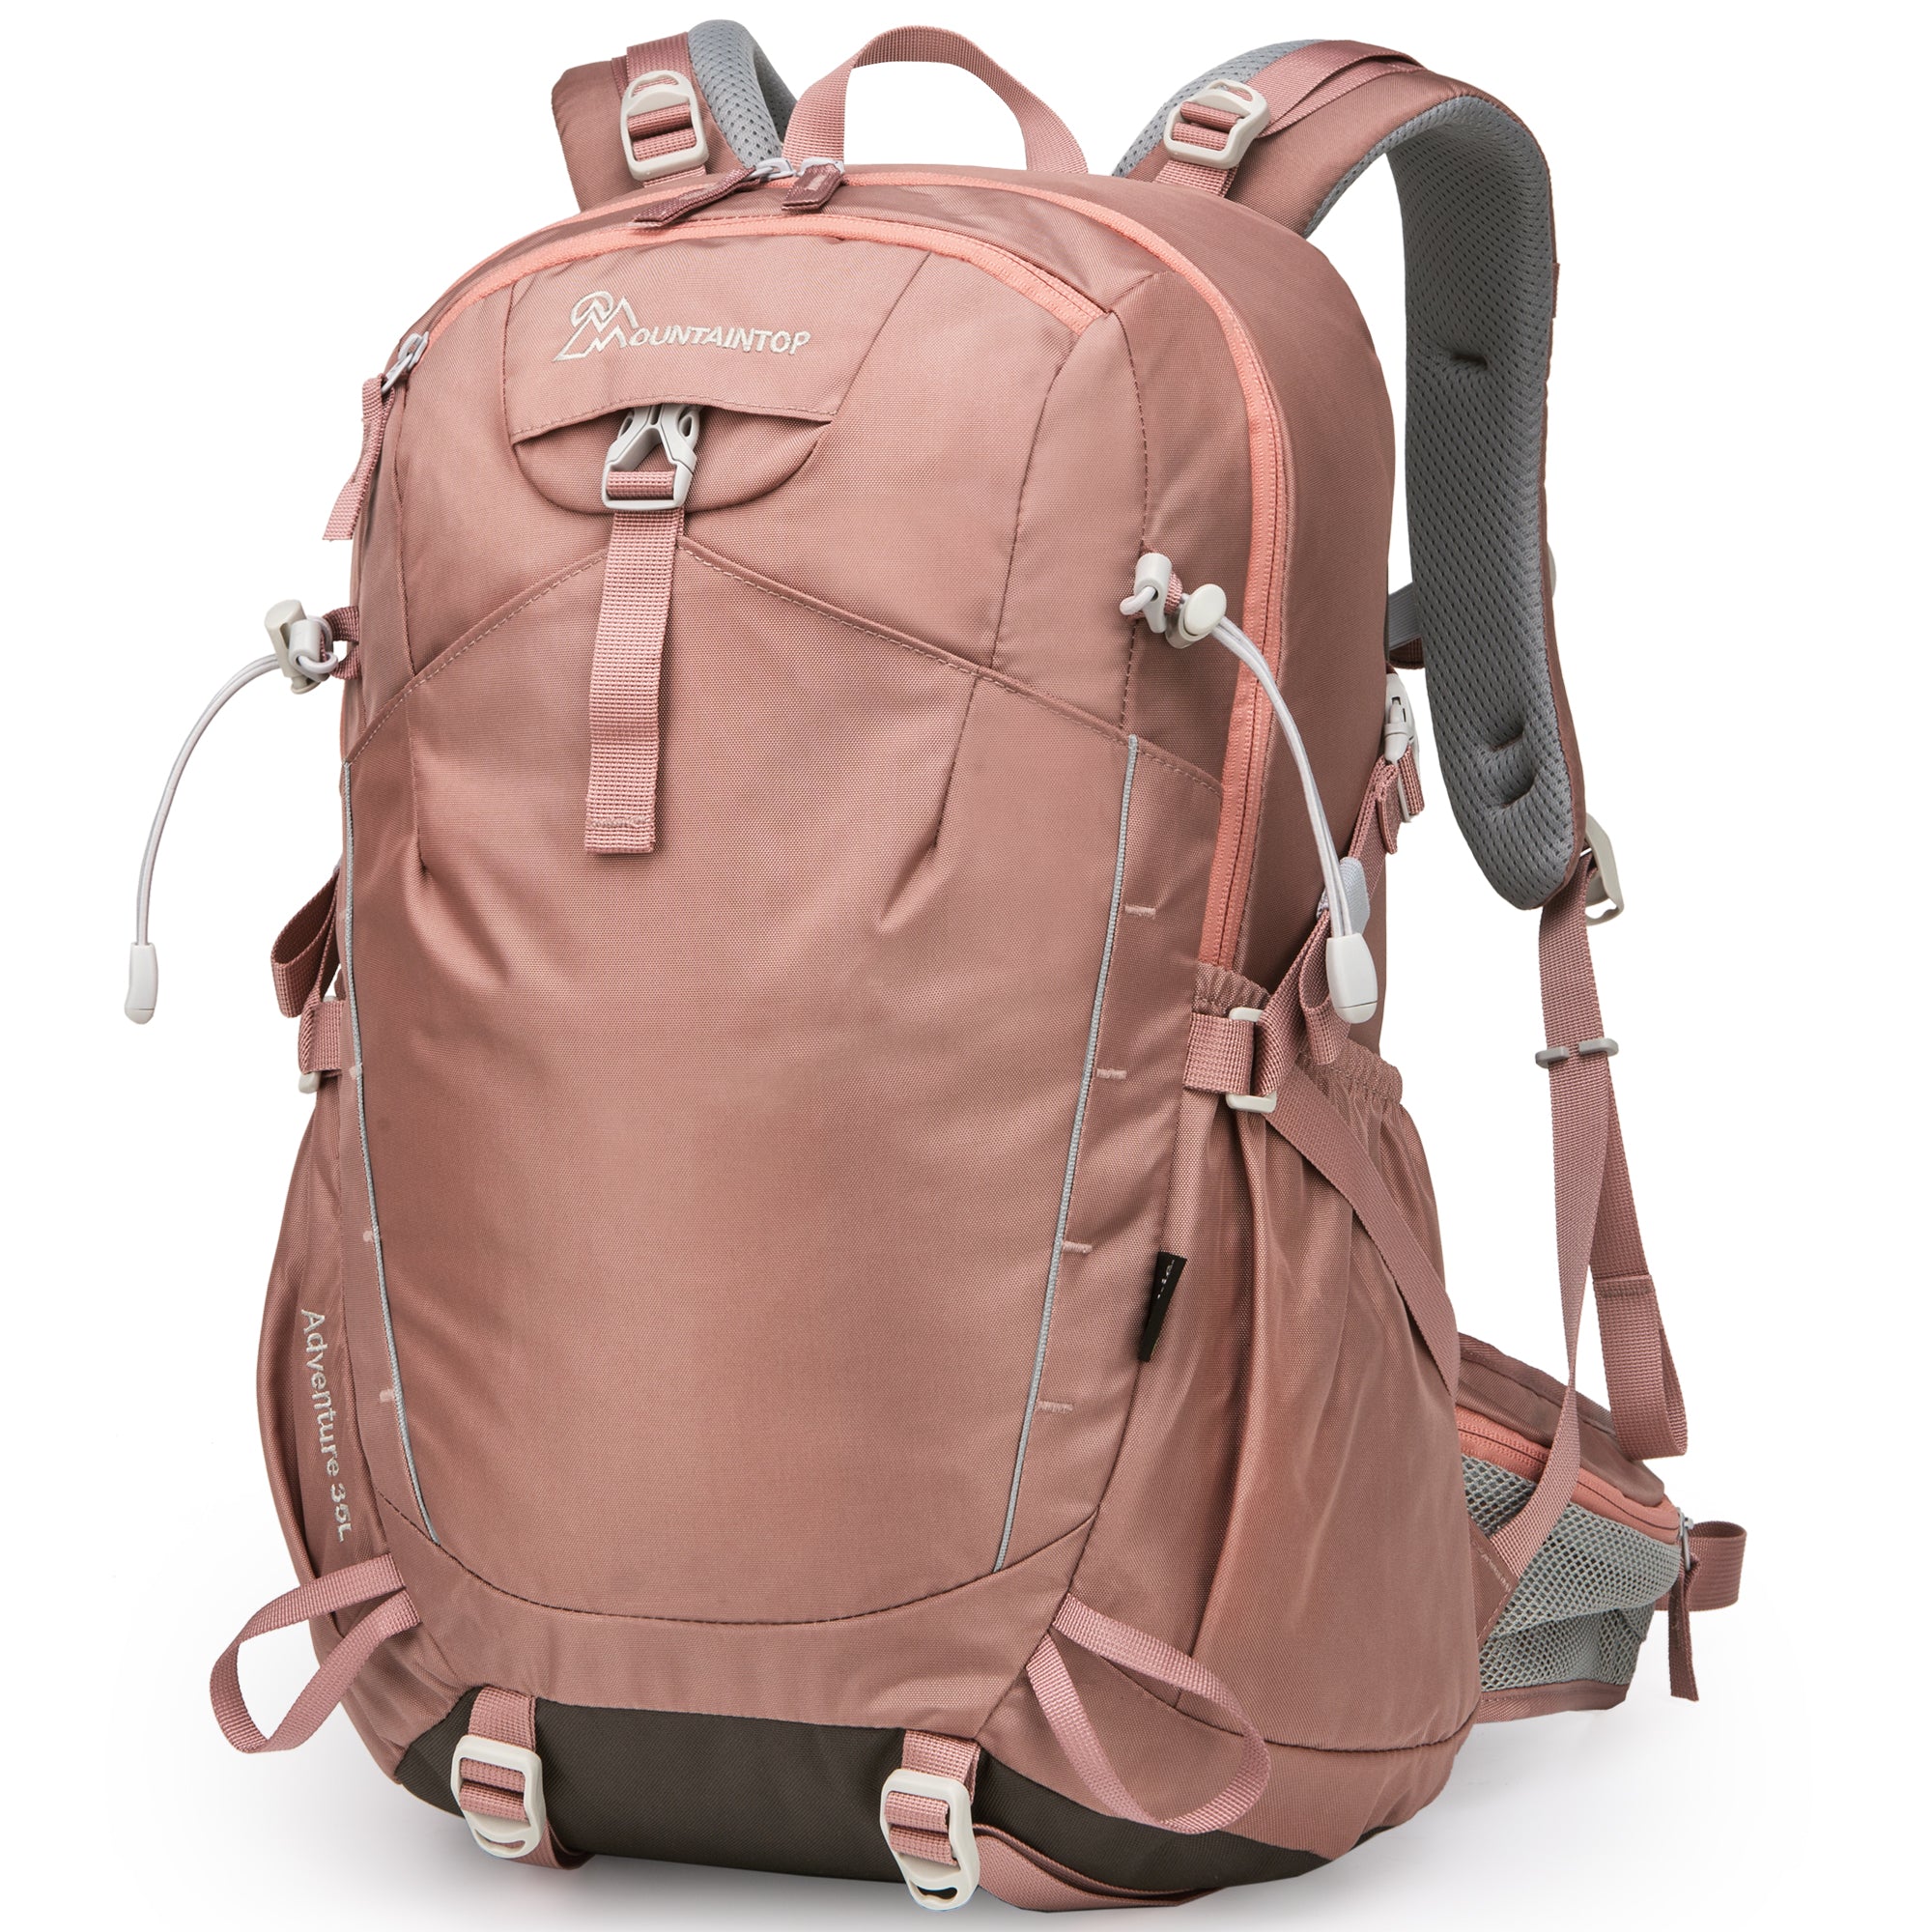 [M6504-35L]MOUNTAINTOP® 35L Women's Hiking Backpacks with Rain Cover - Pink